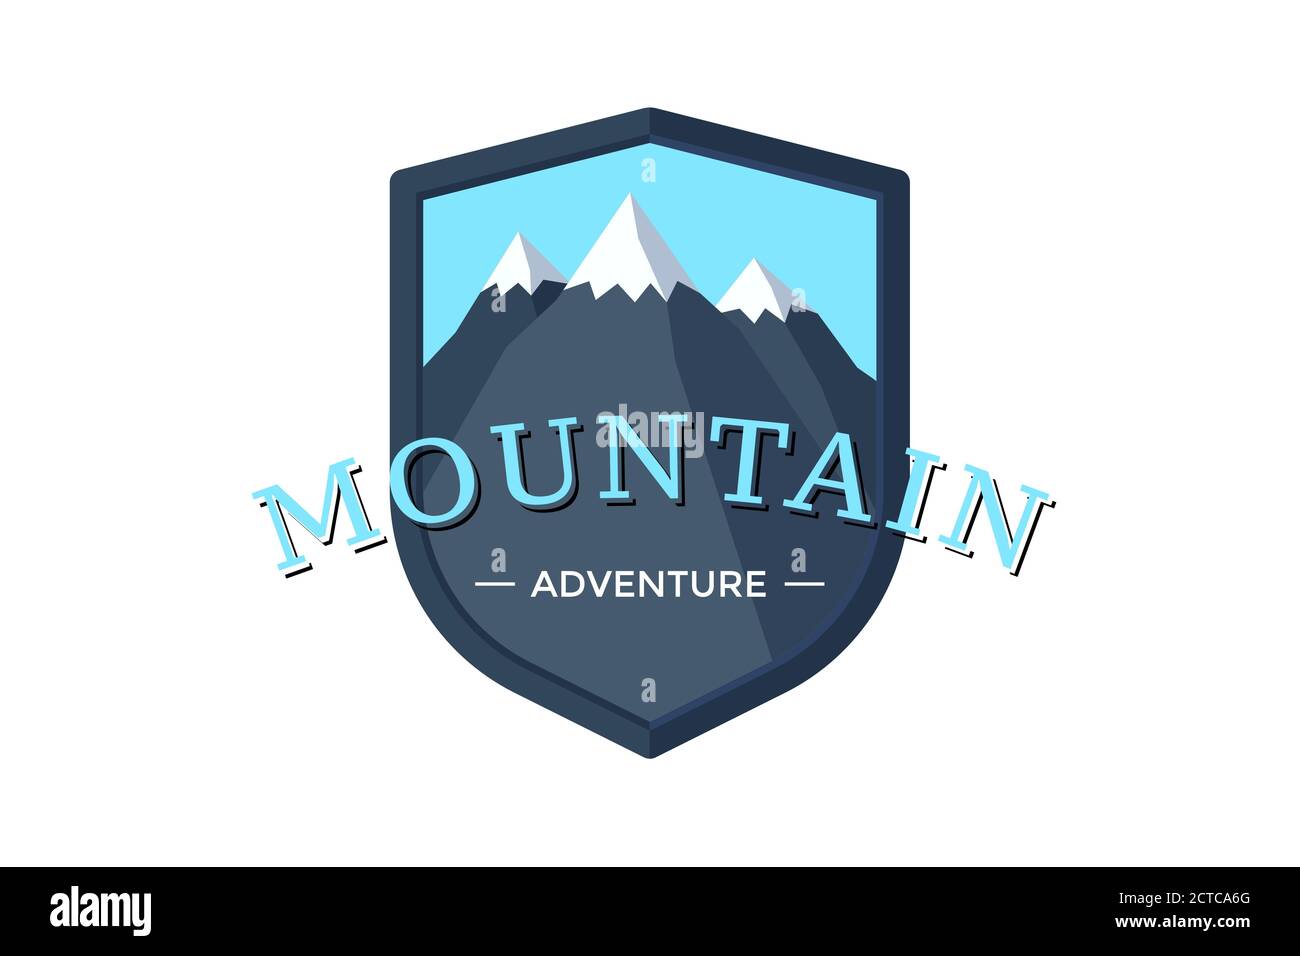 Mountain Adventure shield logo badge for extreme tourism and sport hiking. Outdoor nature rock camping label vector illustration Stock Vector